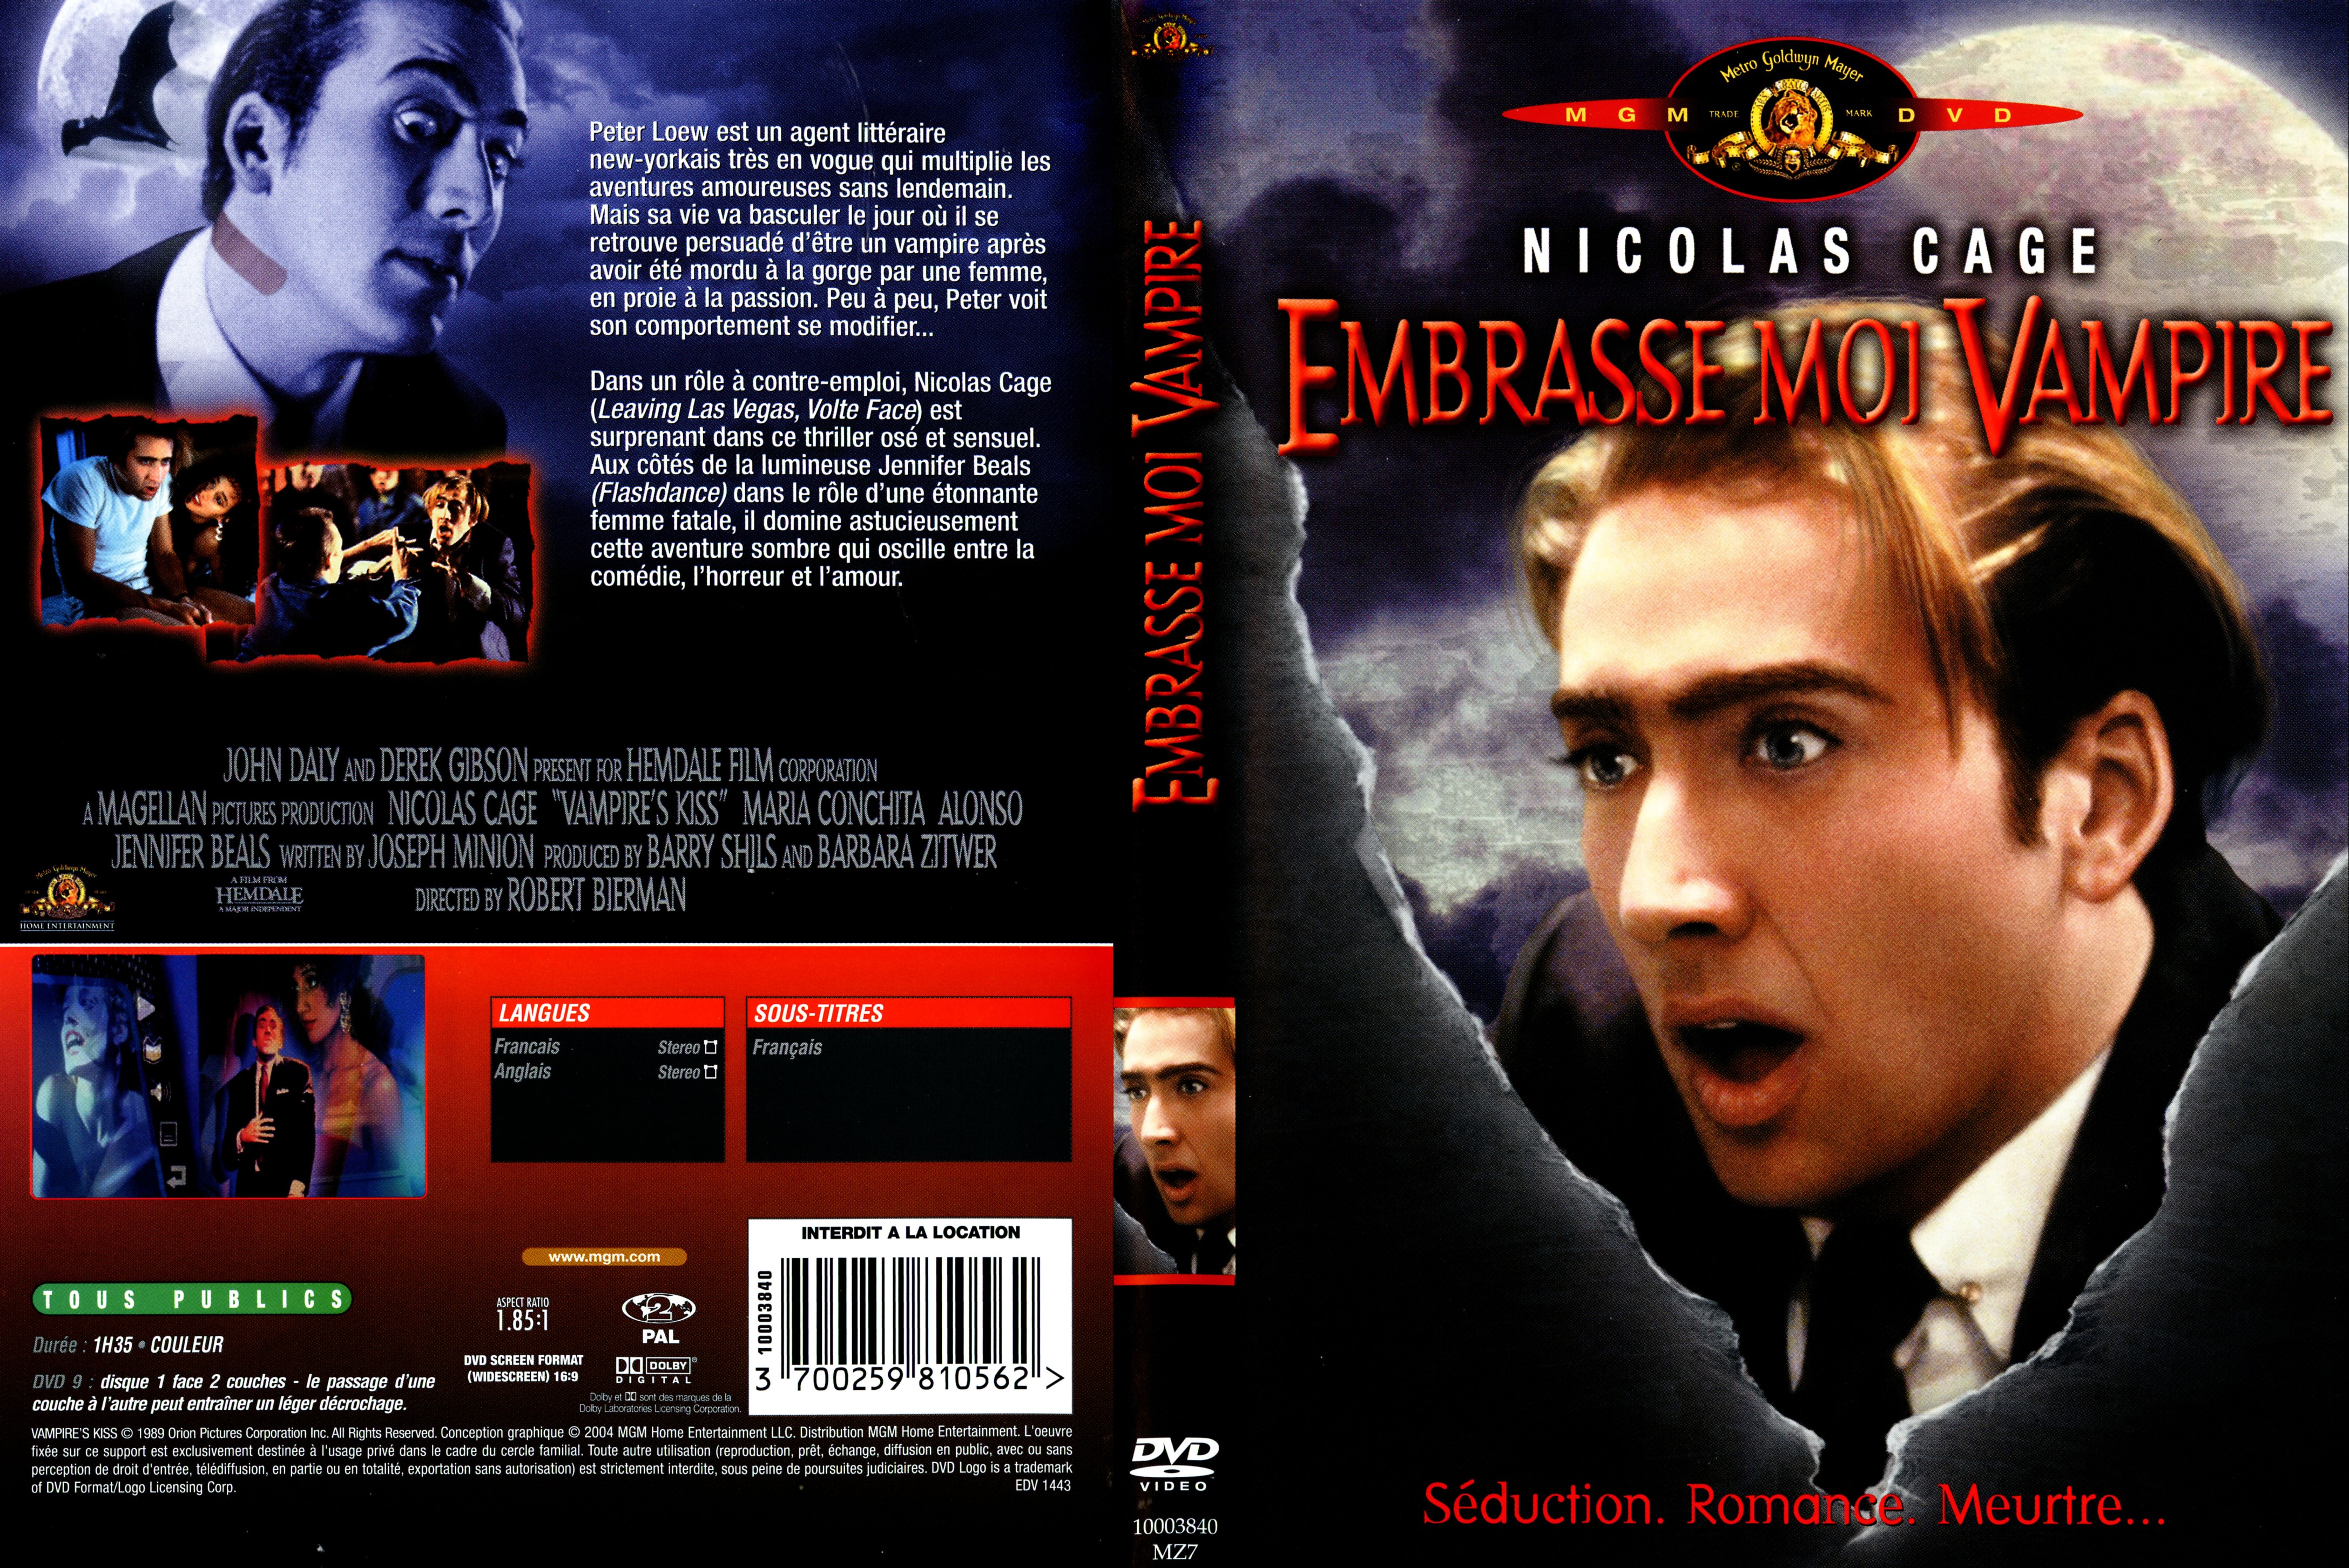 Jaquette DVD Embrasse moi vampire